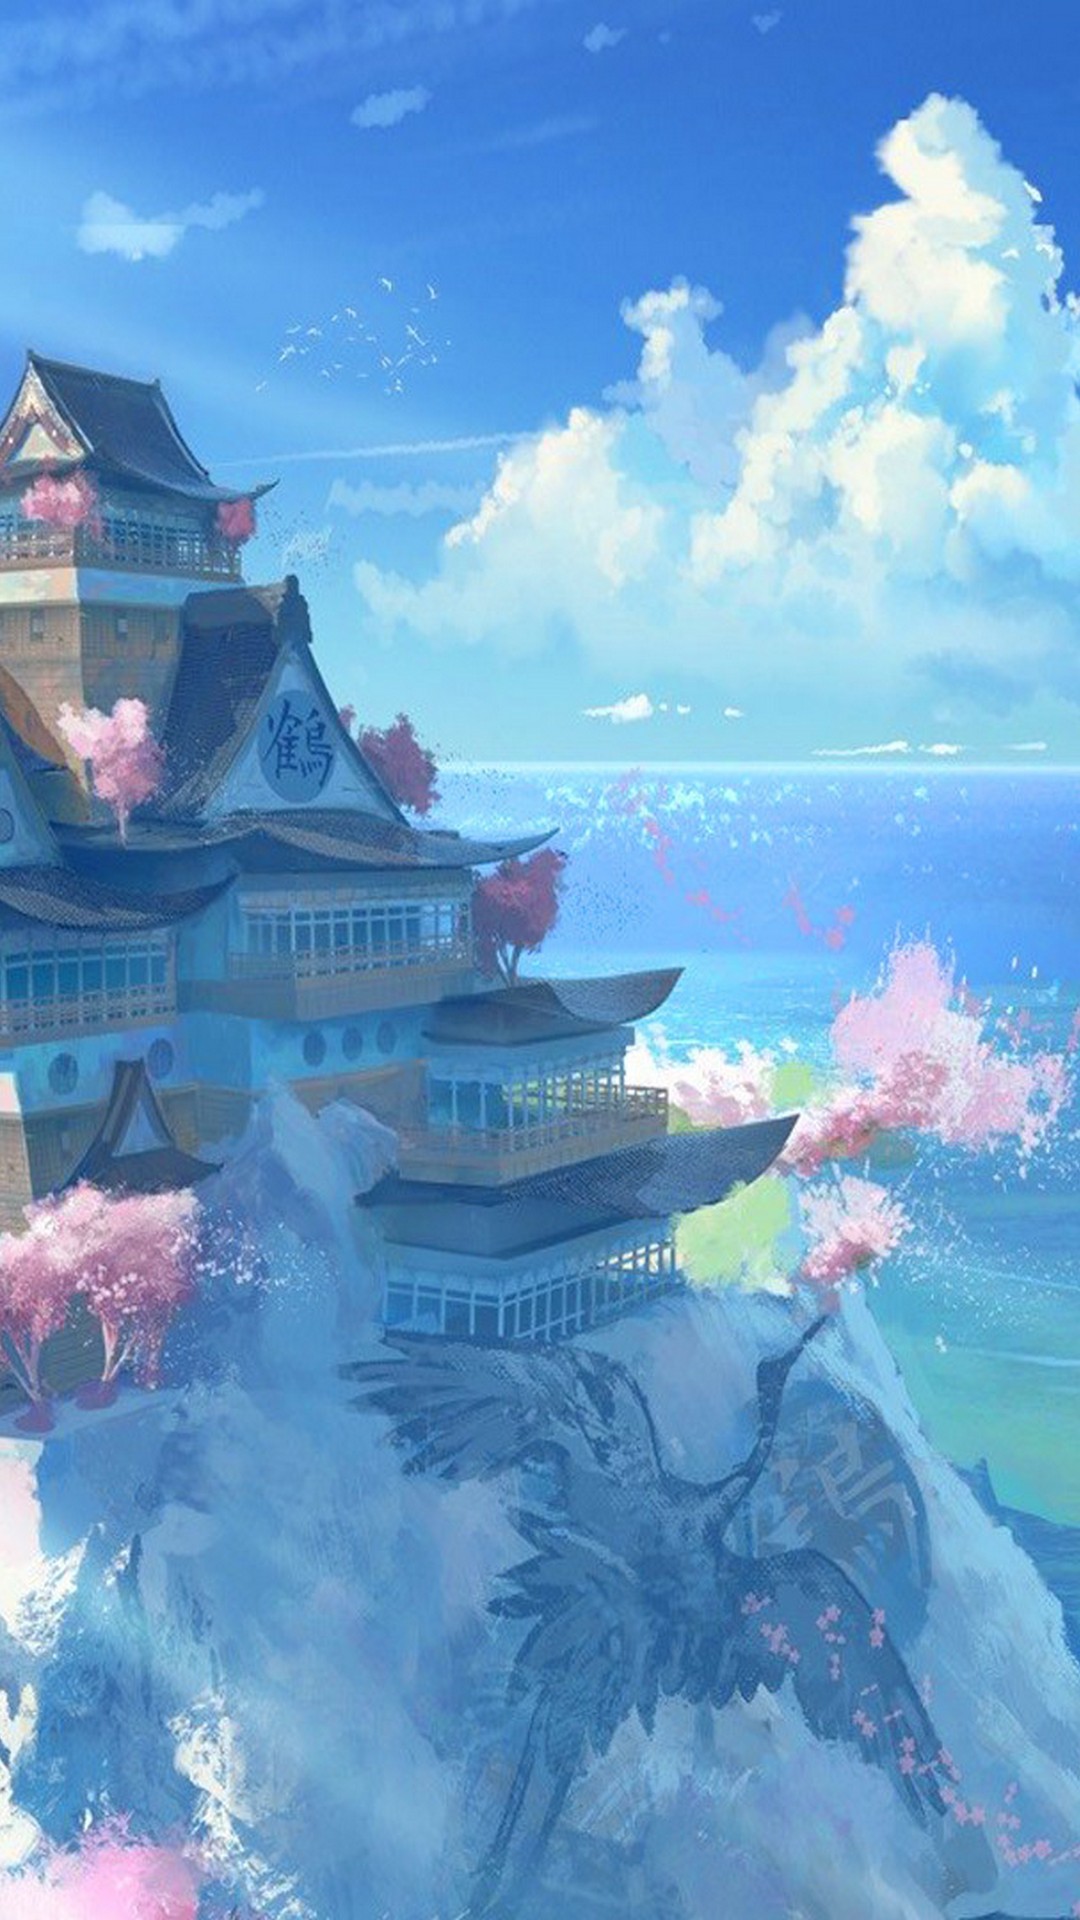 best anime wallpaper engine wallpapers 2020